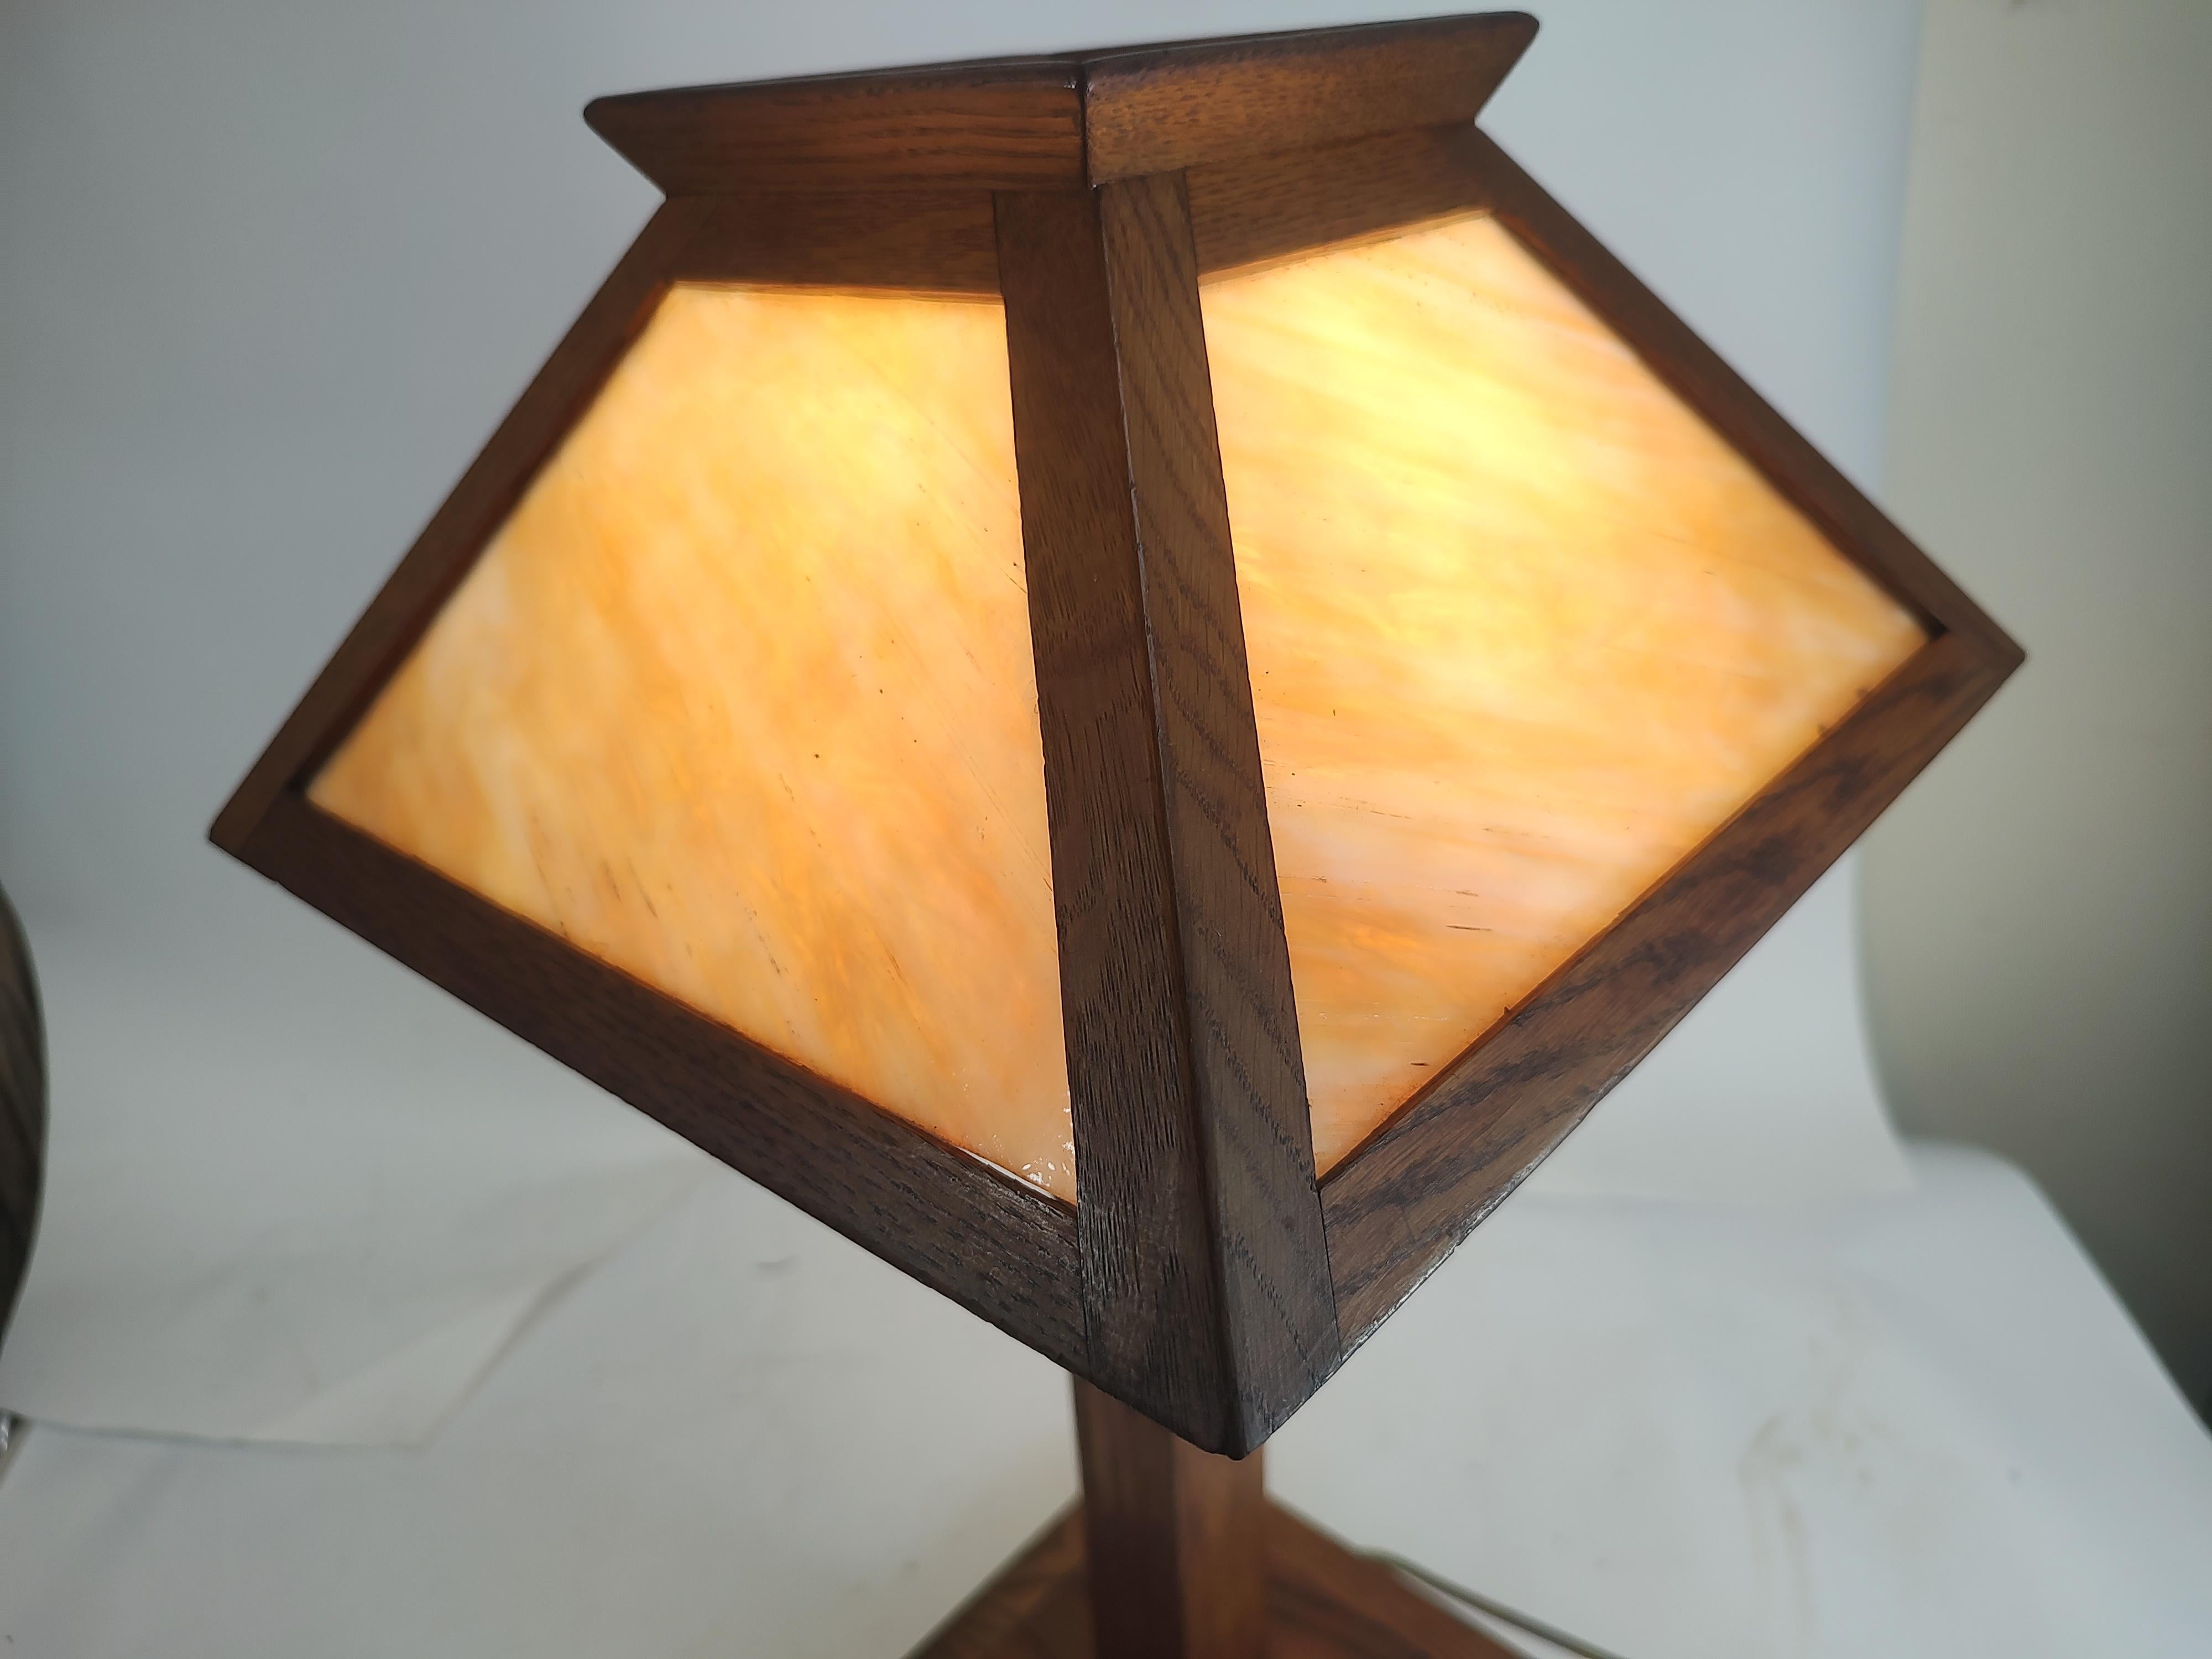 Arts & Crafts Mission Oak with Carmel Colored Slag Glass Table Lamp C 1910 For Sale 2